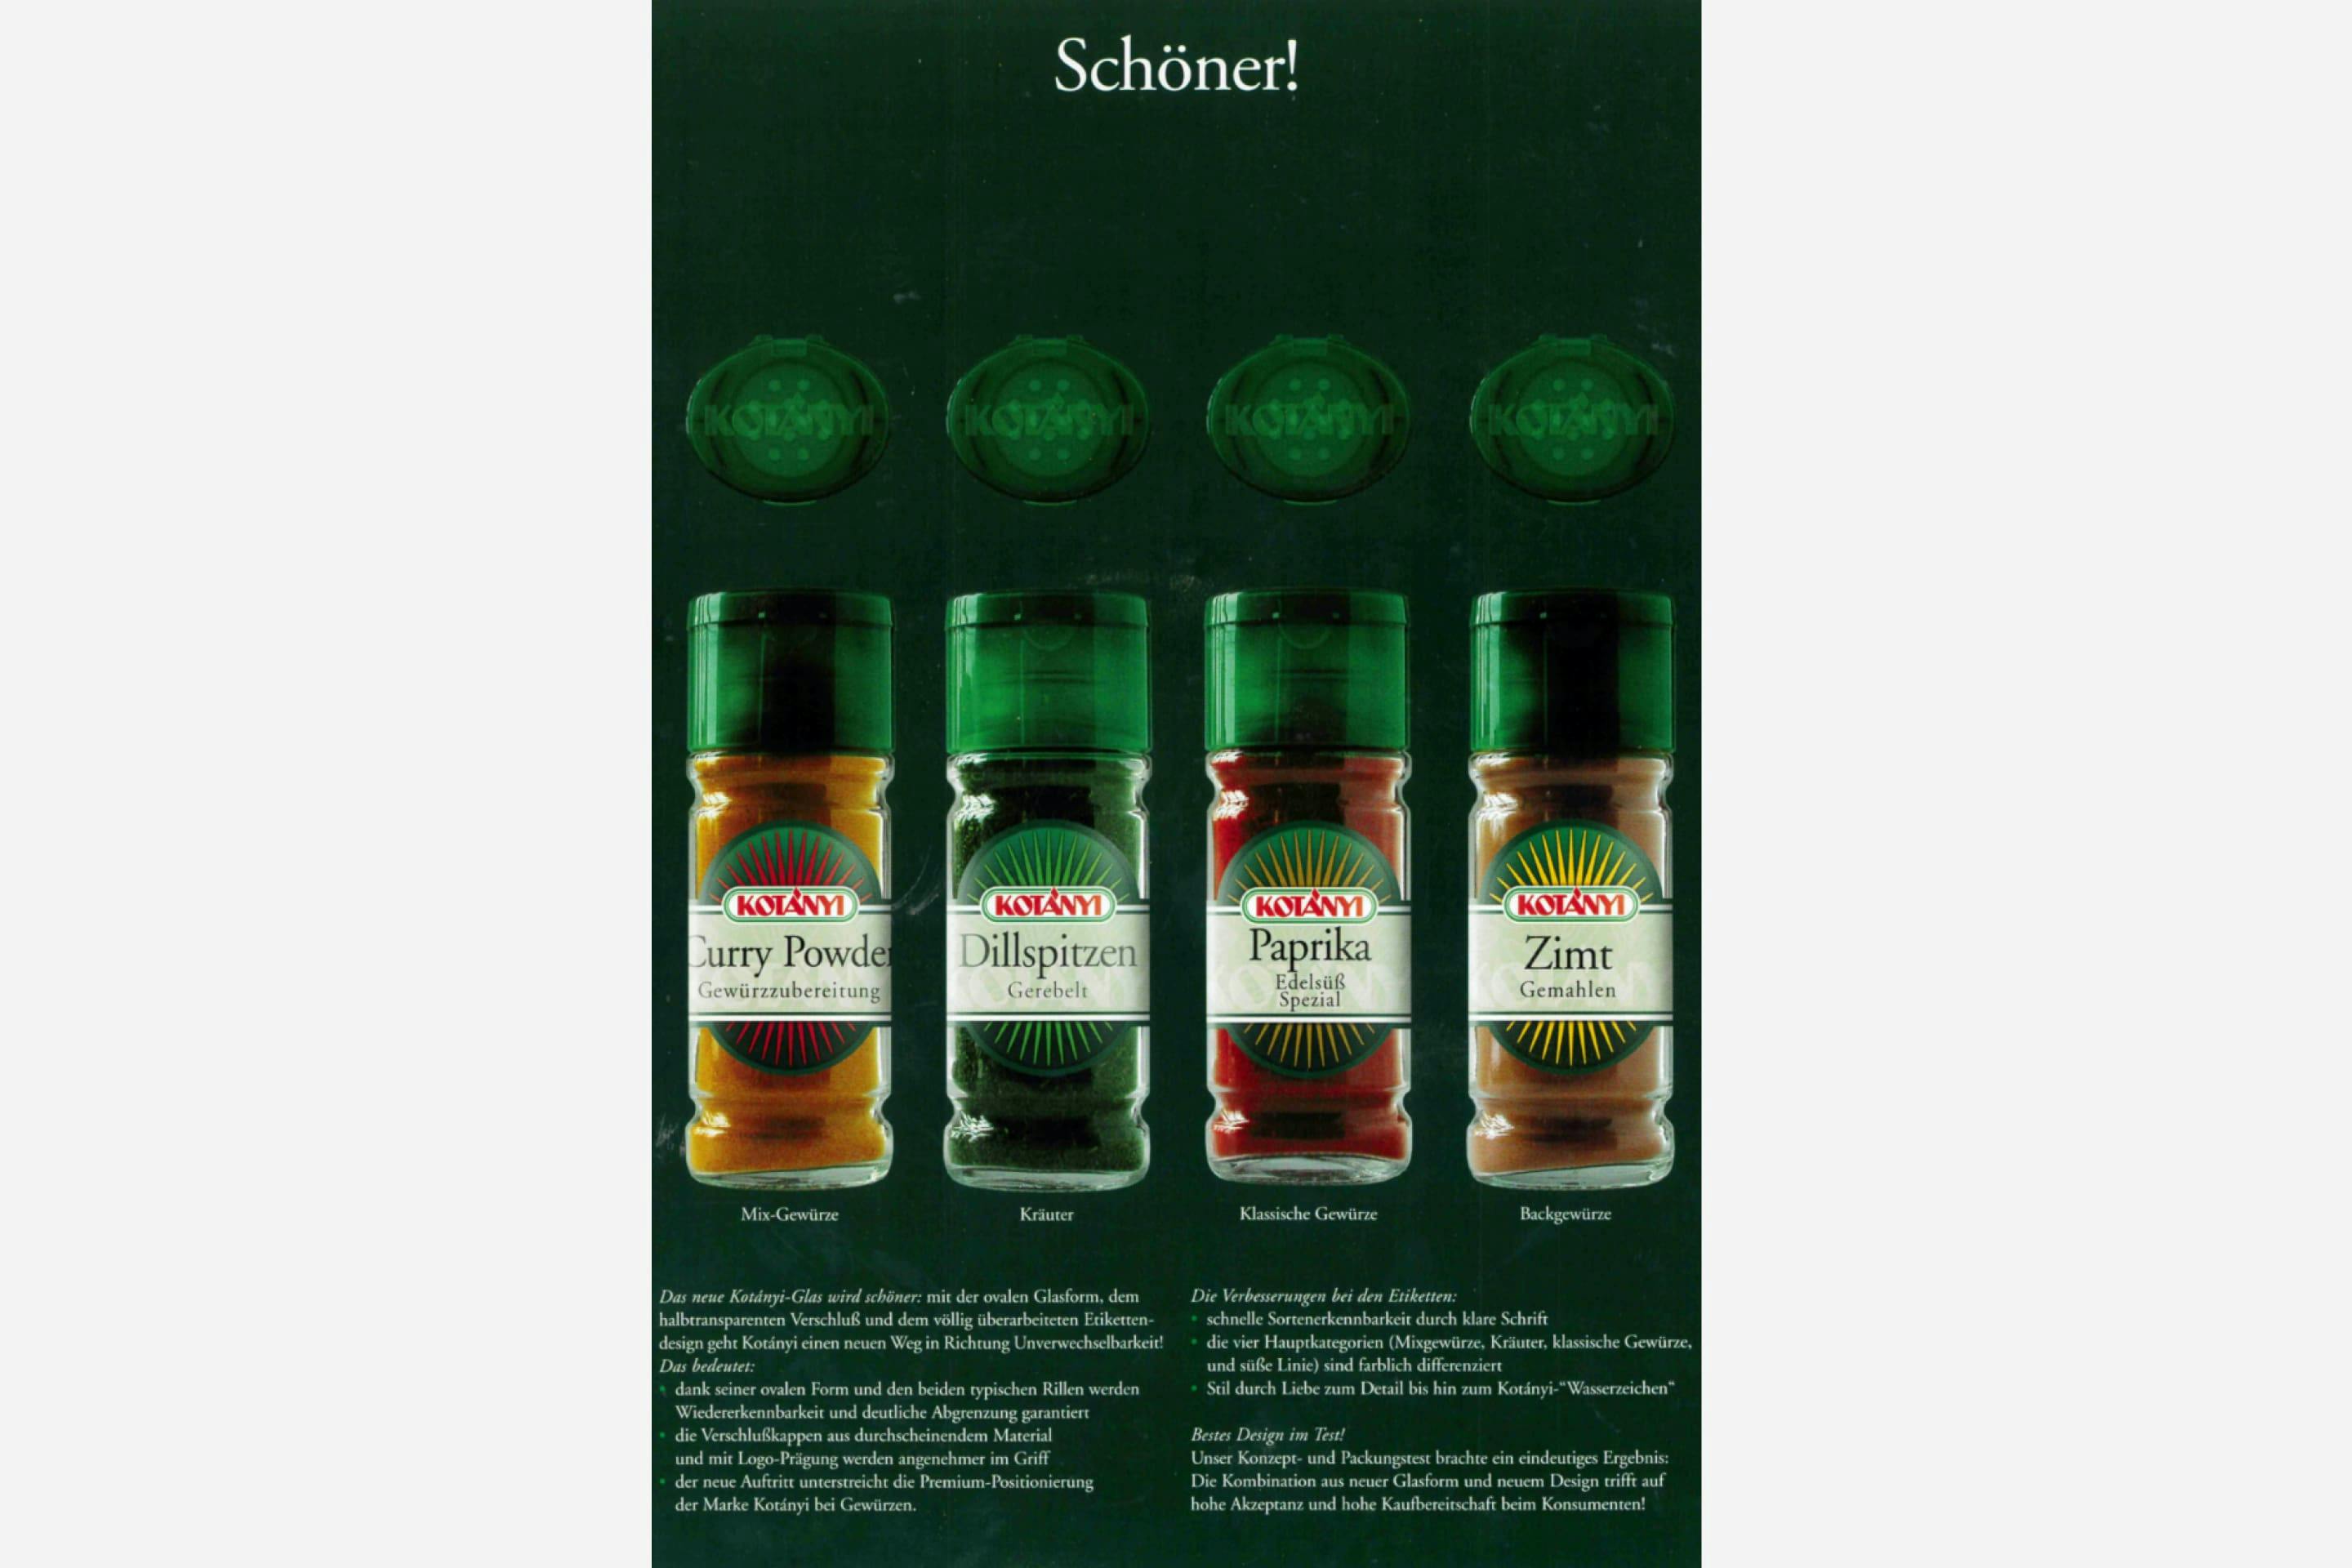 Kotányi advertising poster for spice in glasses from the 2000s